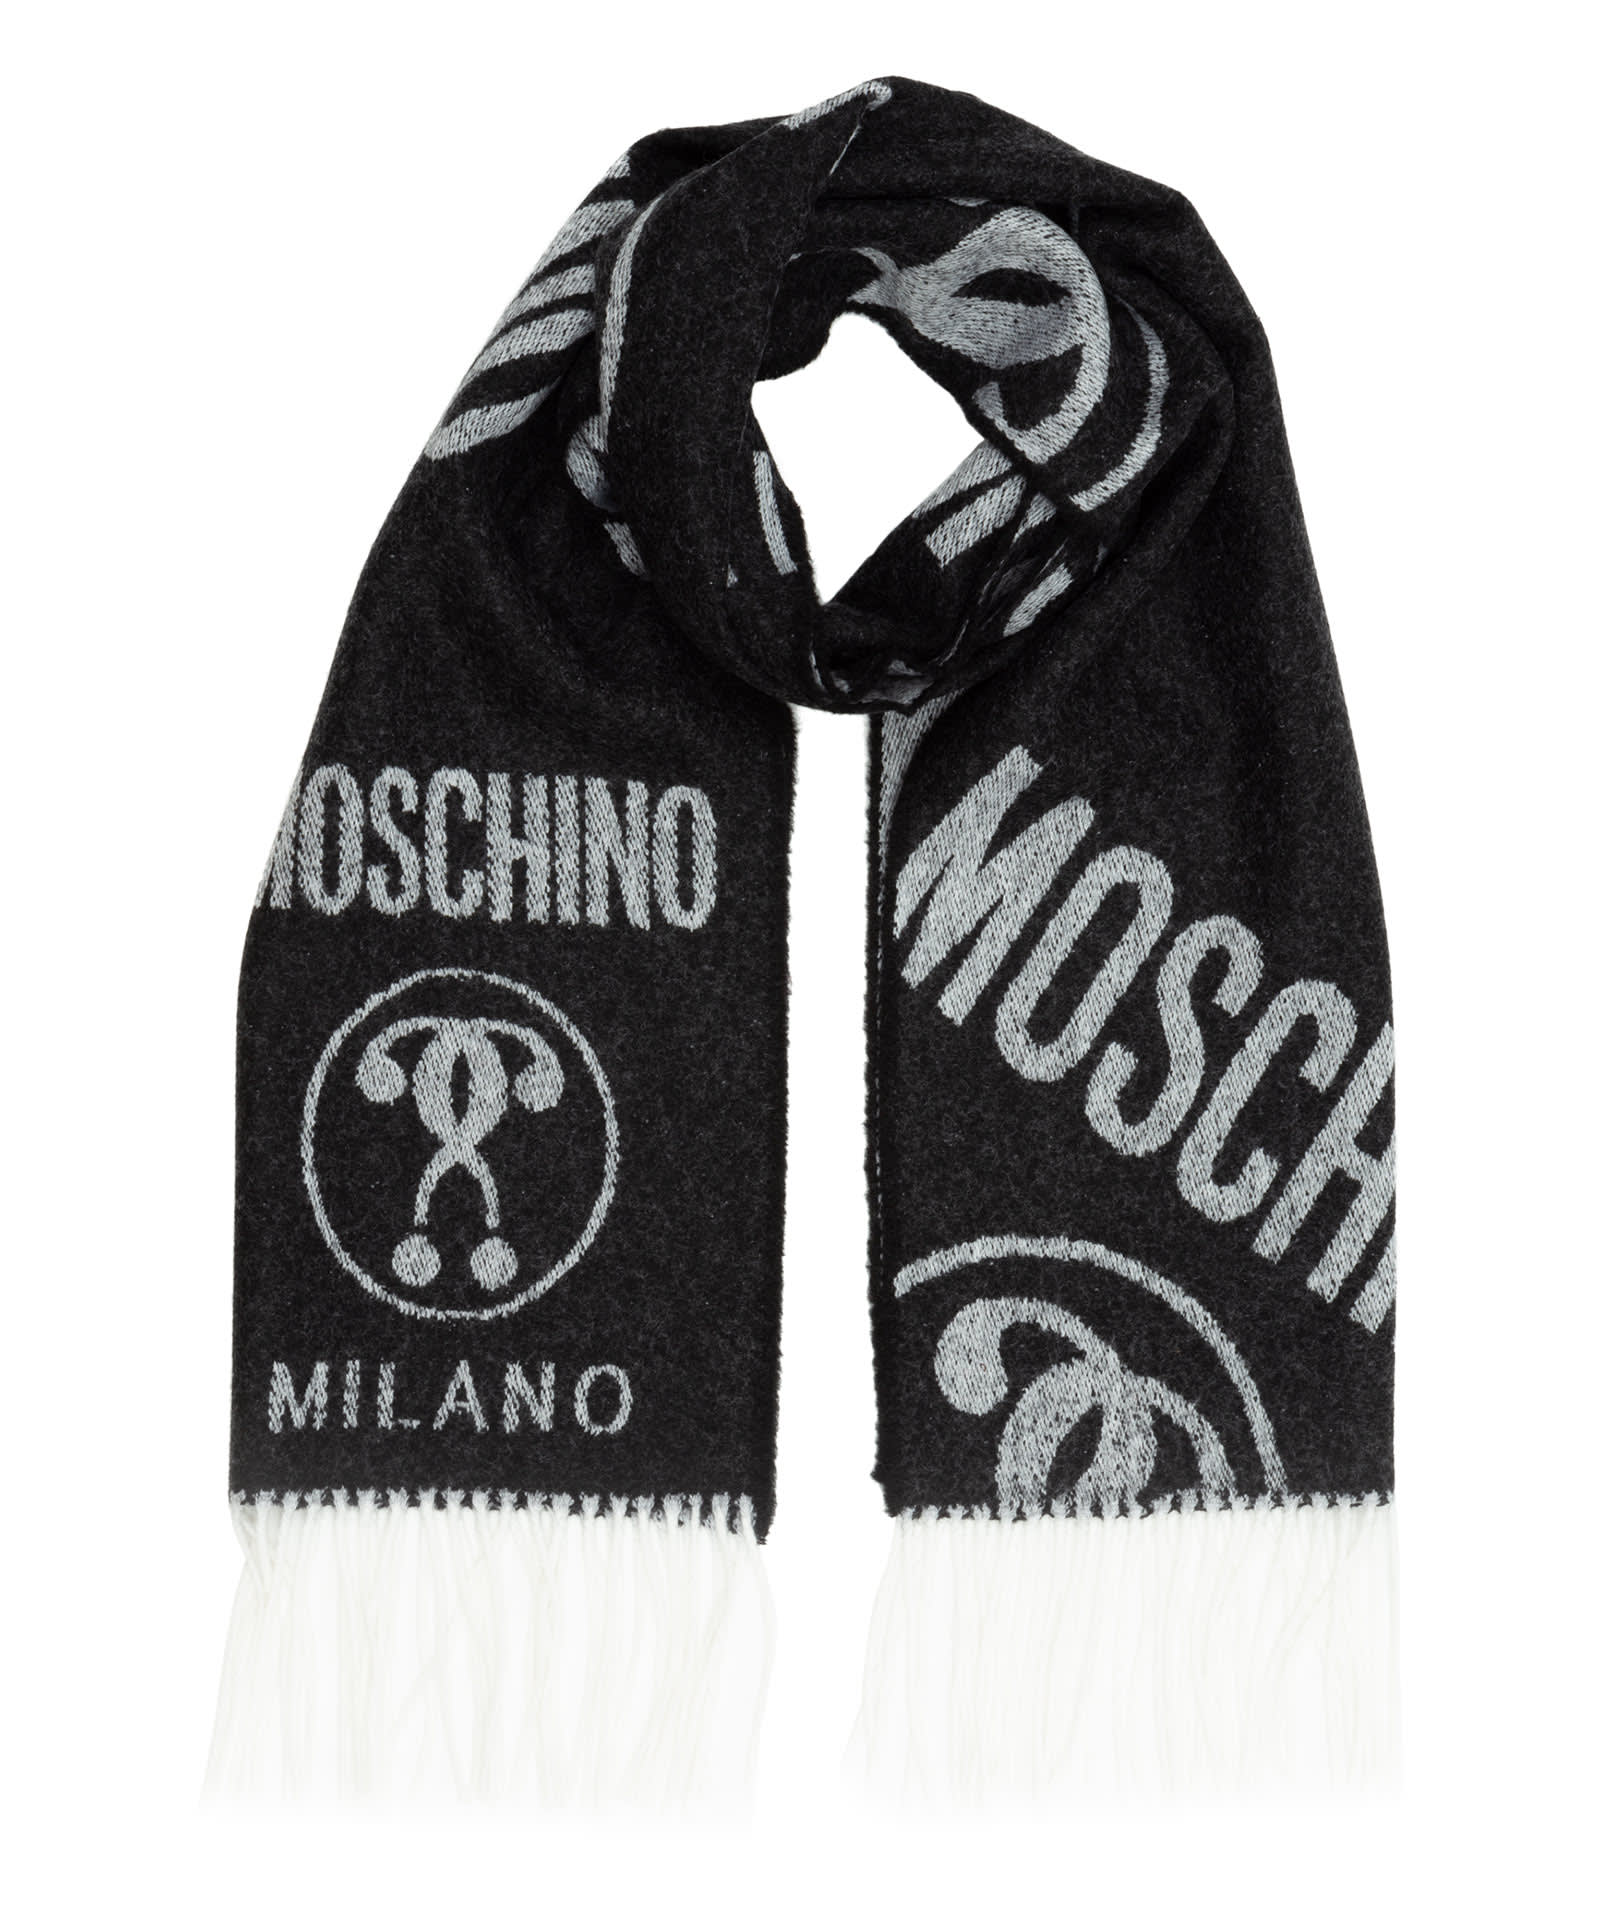 MOSCHINO DOUBLE QUESTION MARK WOOL SCARF